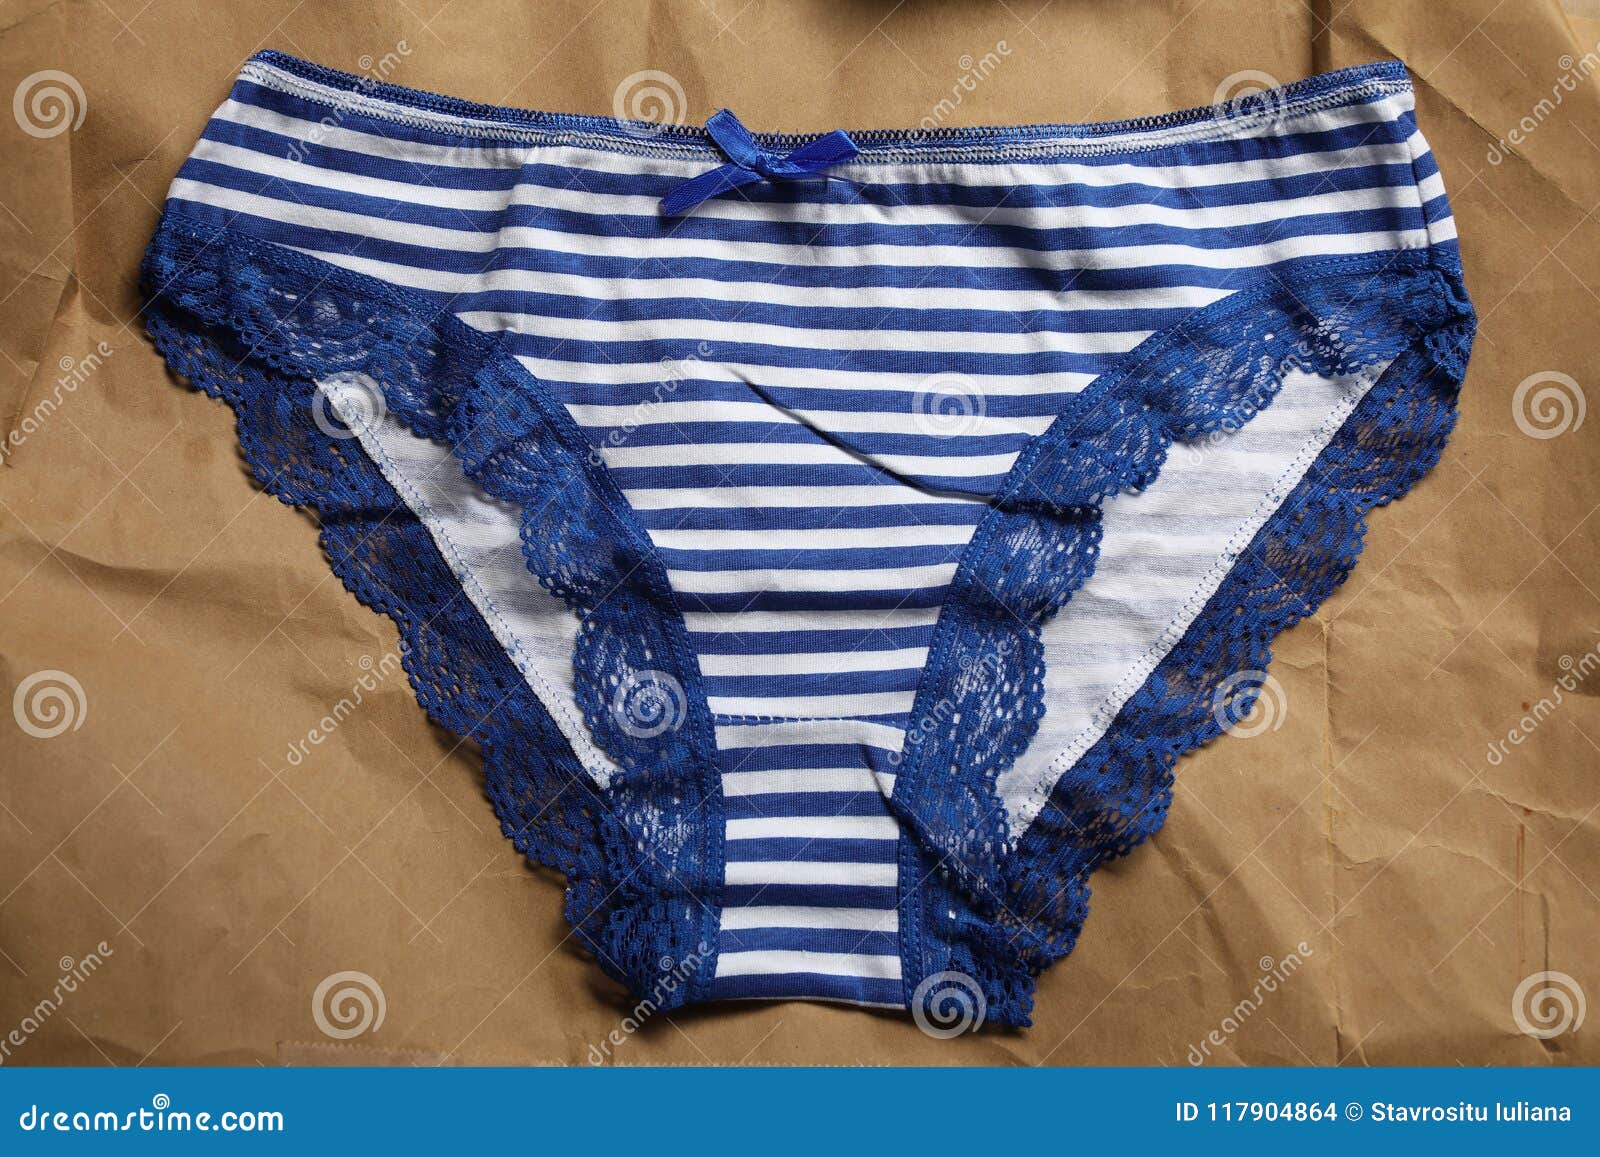 ali lian recommends Blue And White Striped Panties